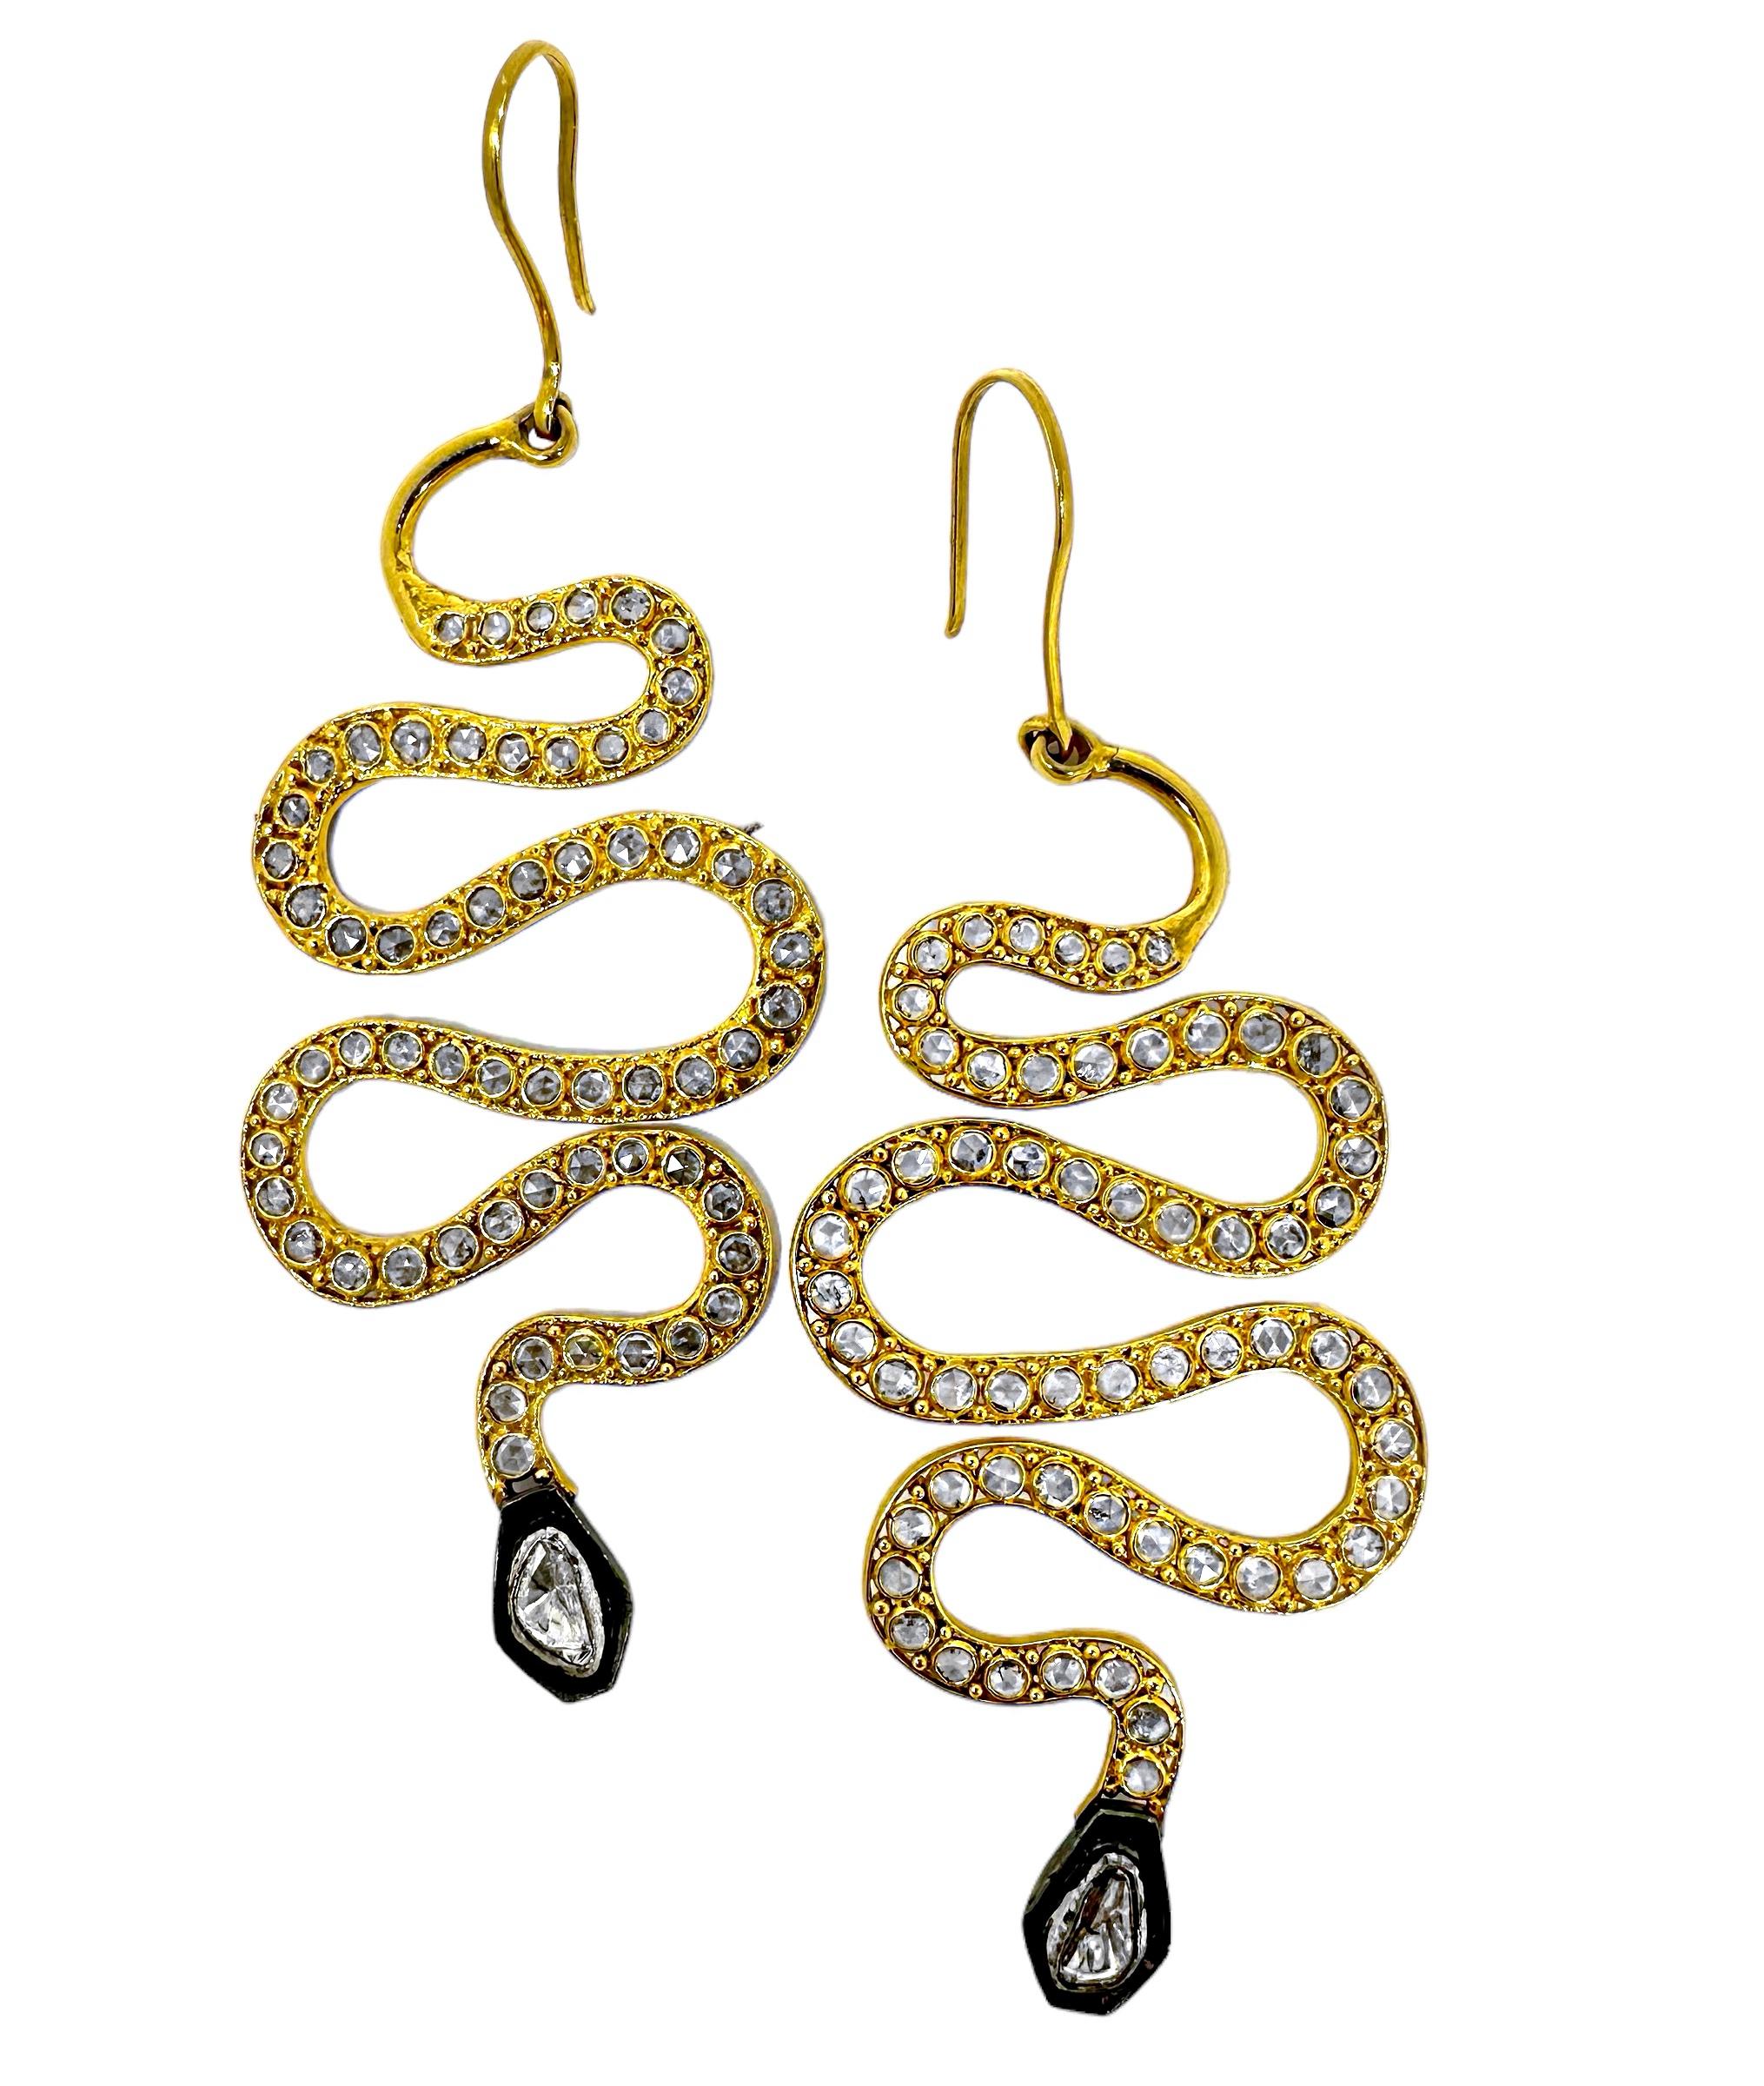 3.5 Inches Long 14k Yellow Gold and Rose Cut Diamond Serpentine Hanging Earrings For Sale